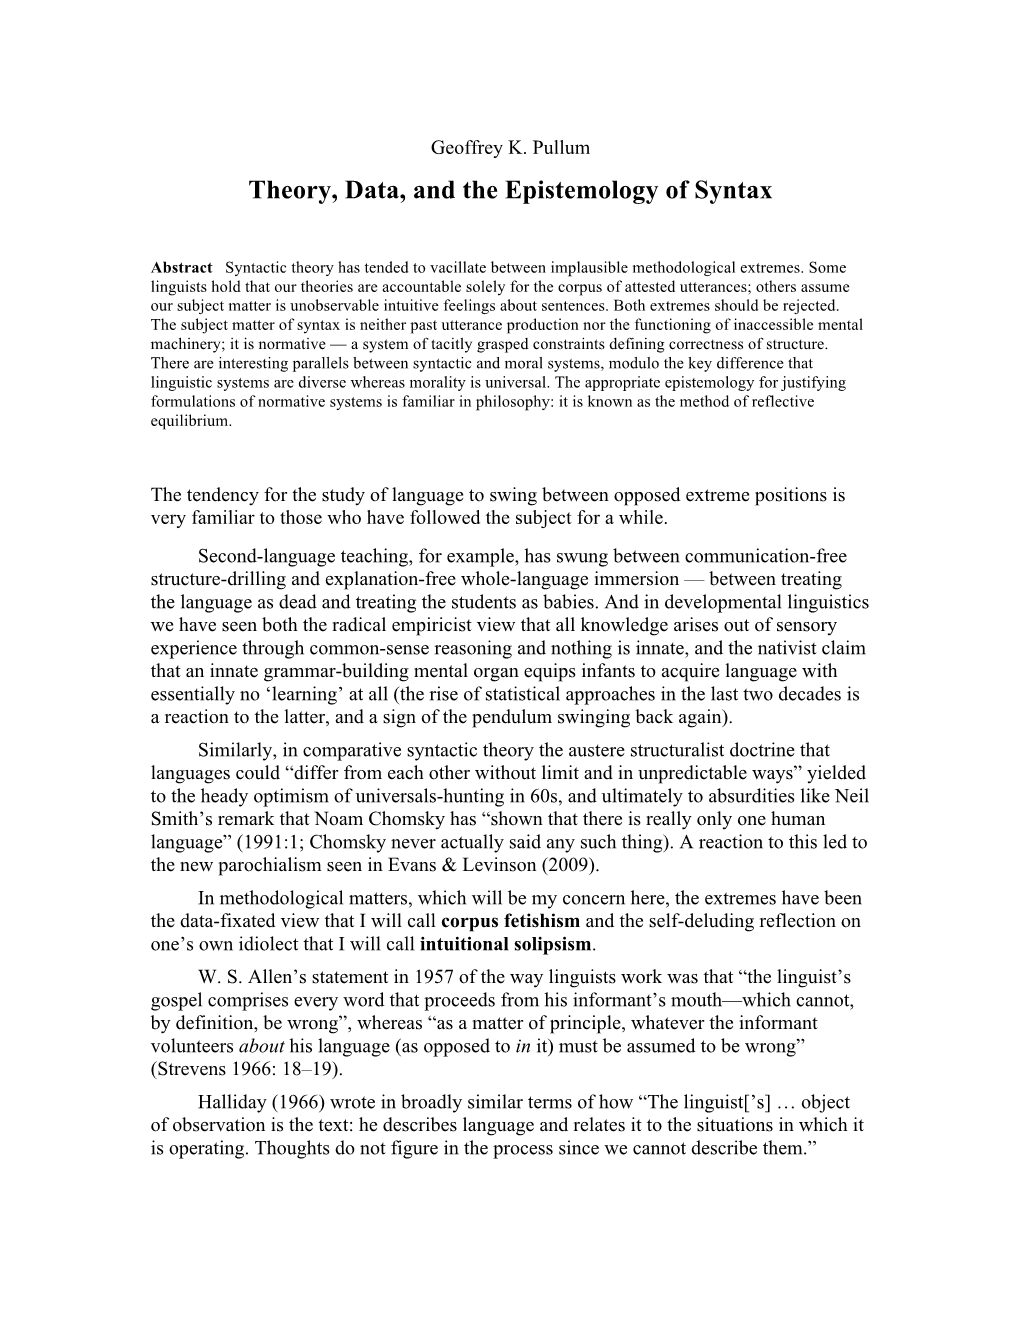 Theory, Data, and the Epistemology of Syntax